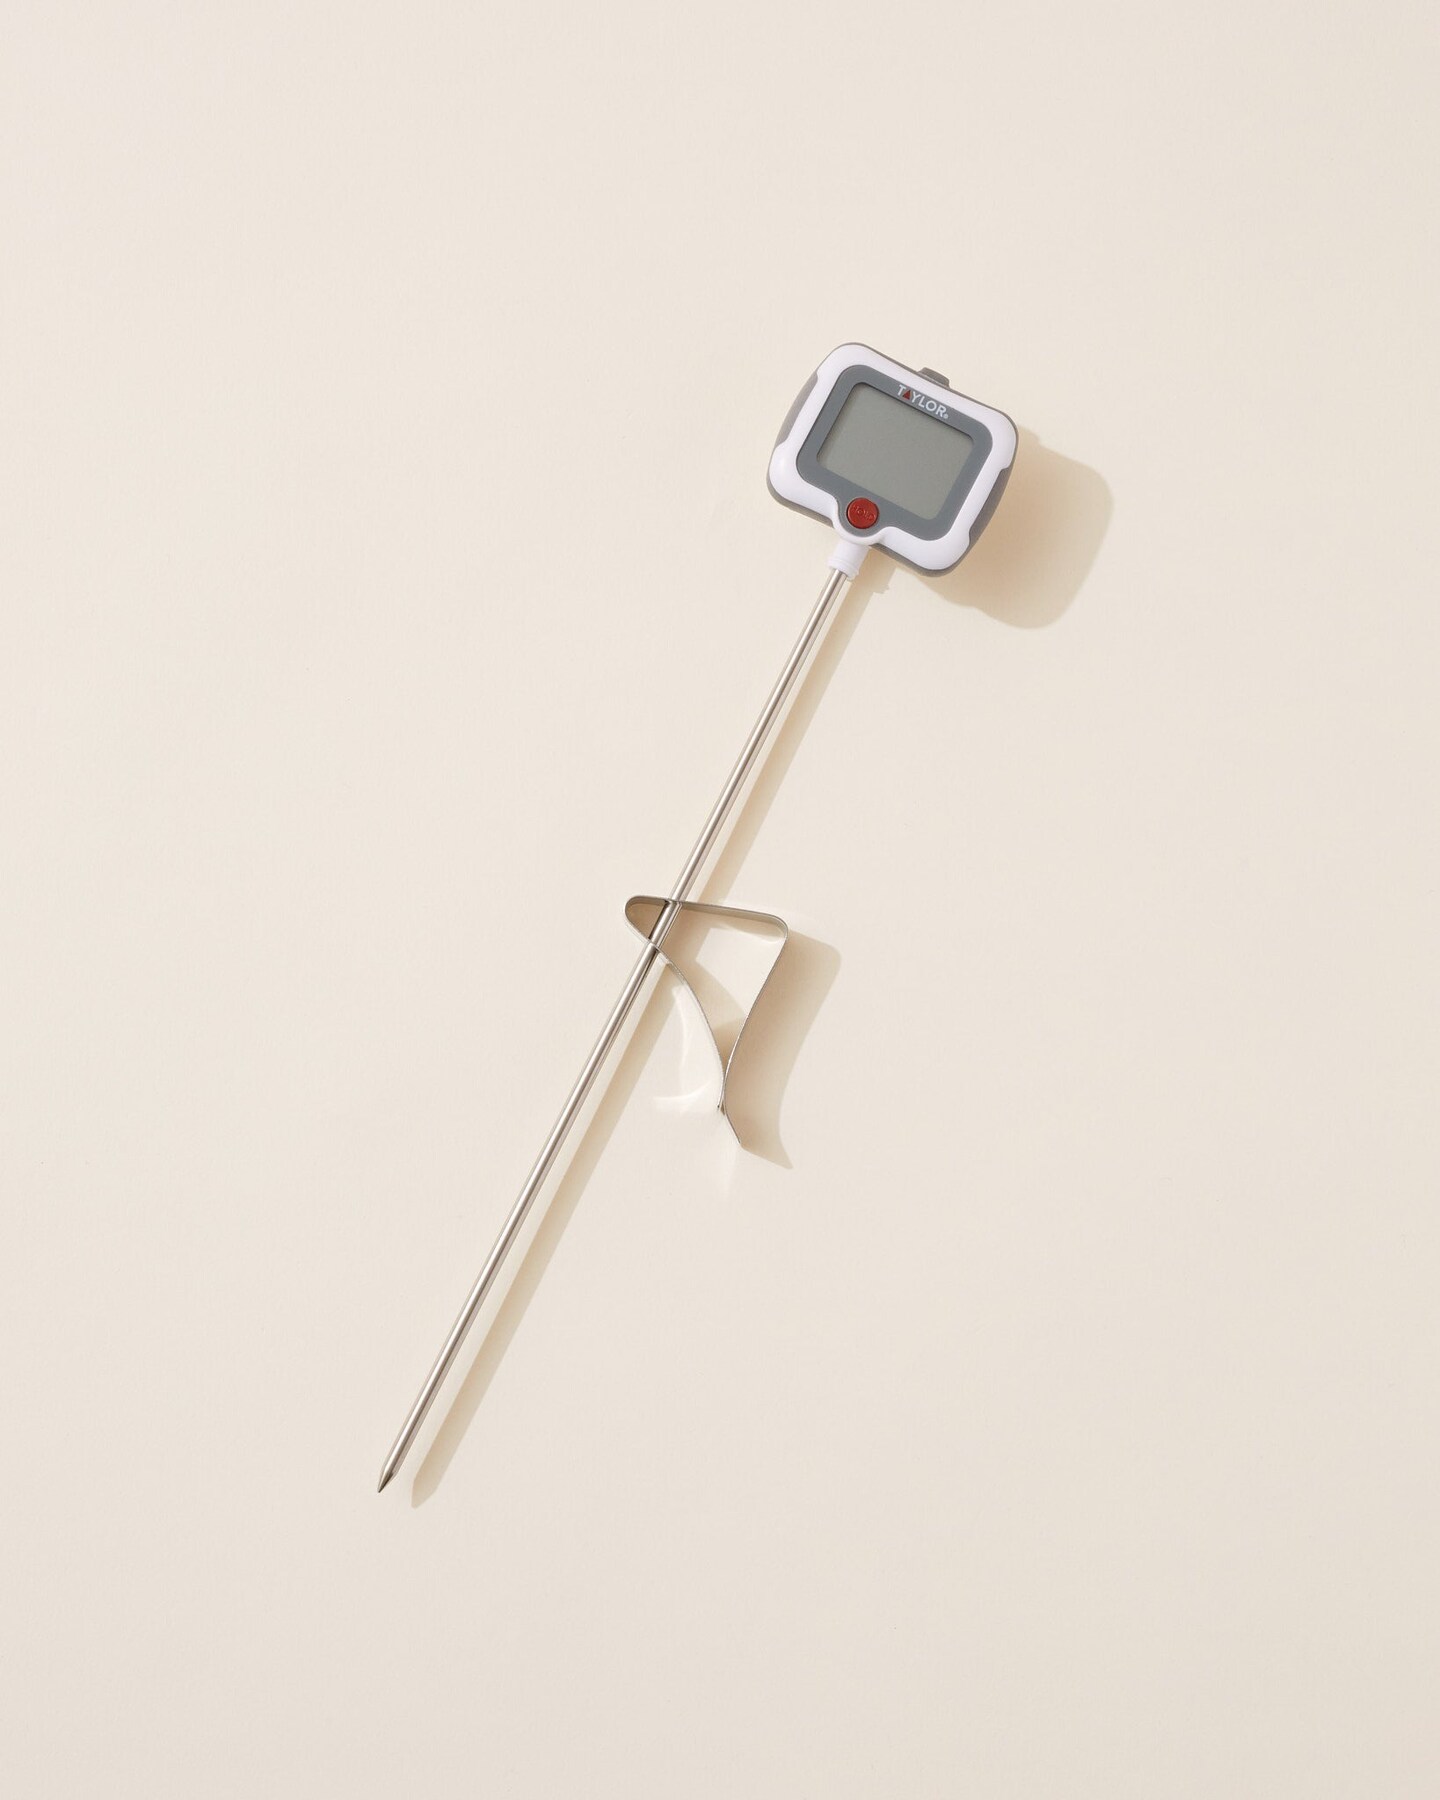 Digital Thermometer for Making Candles, Soap